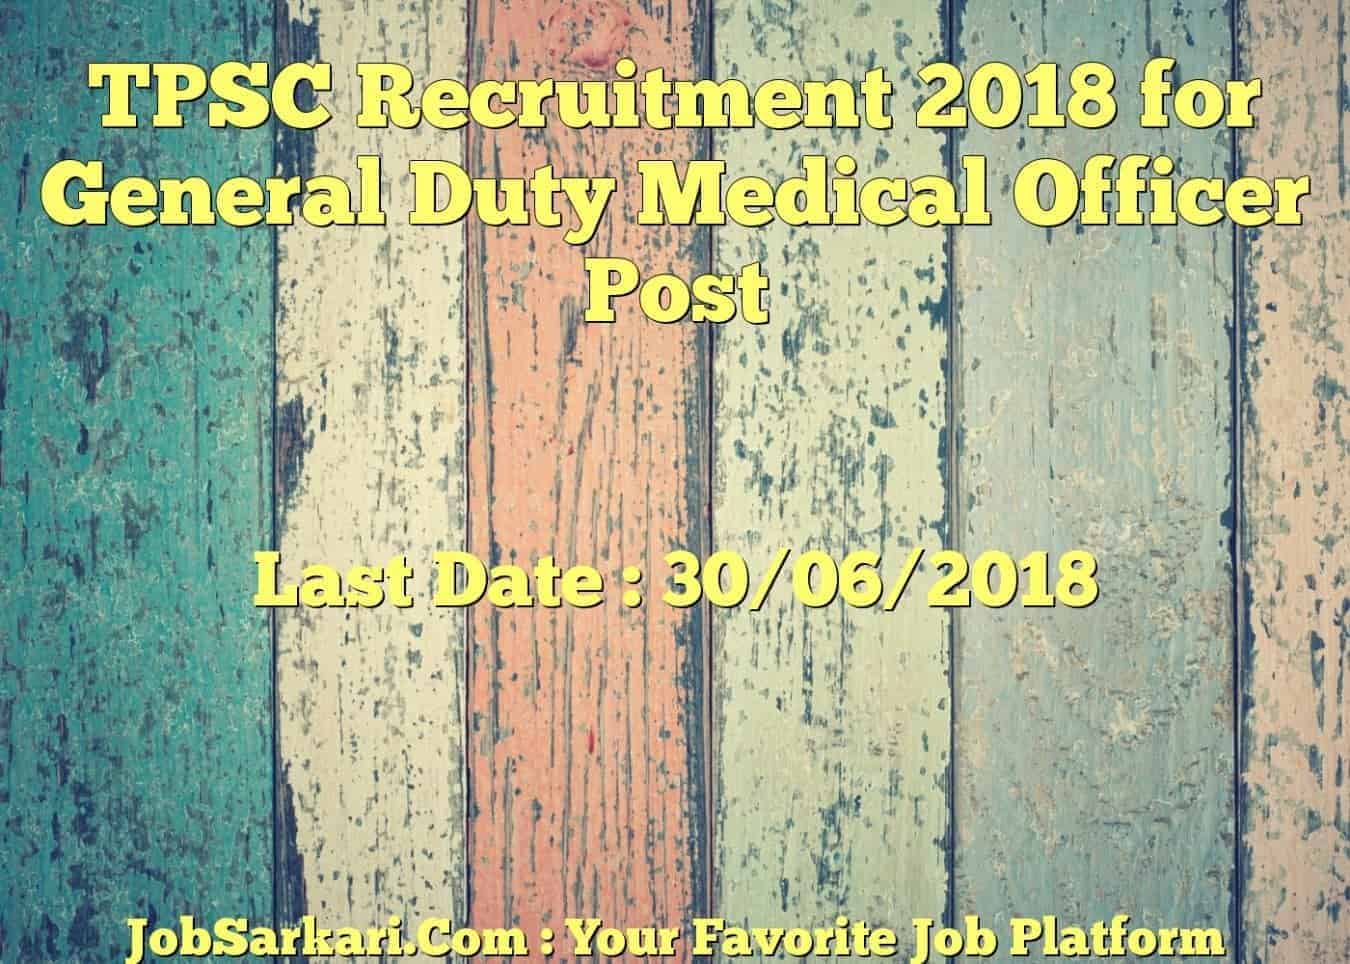 TPSC Recruitment 2018 for General Duty Medical Officer Post